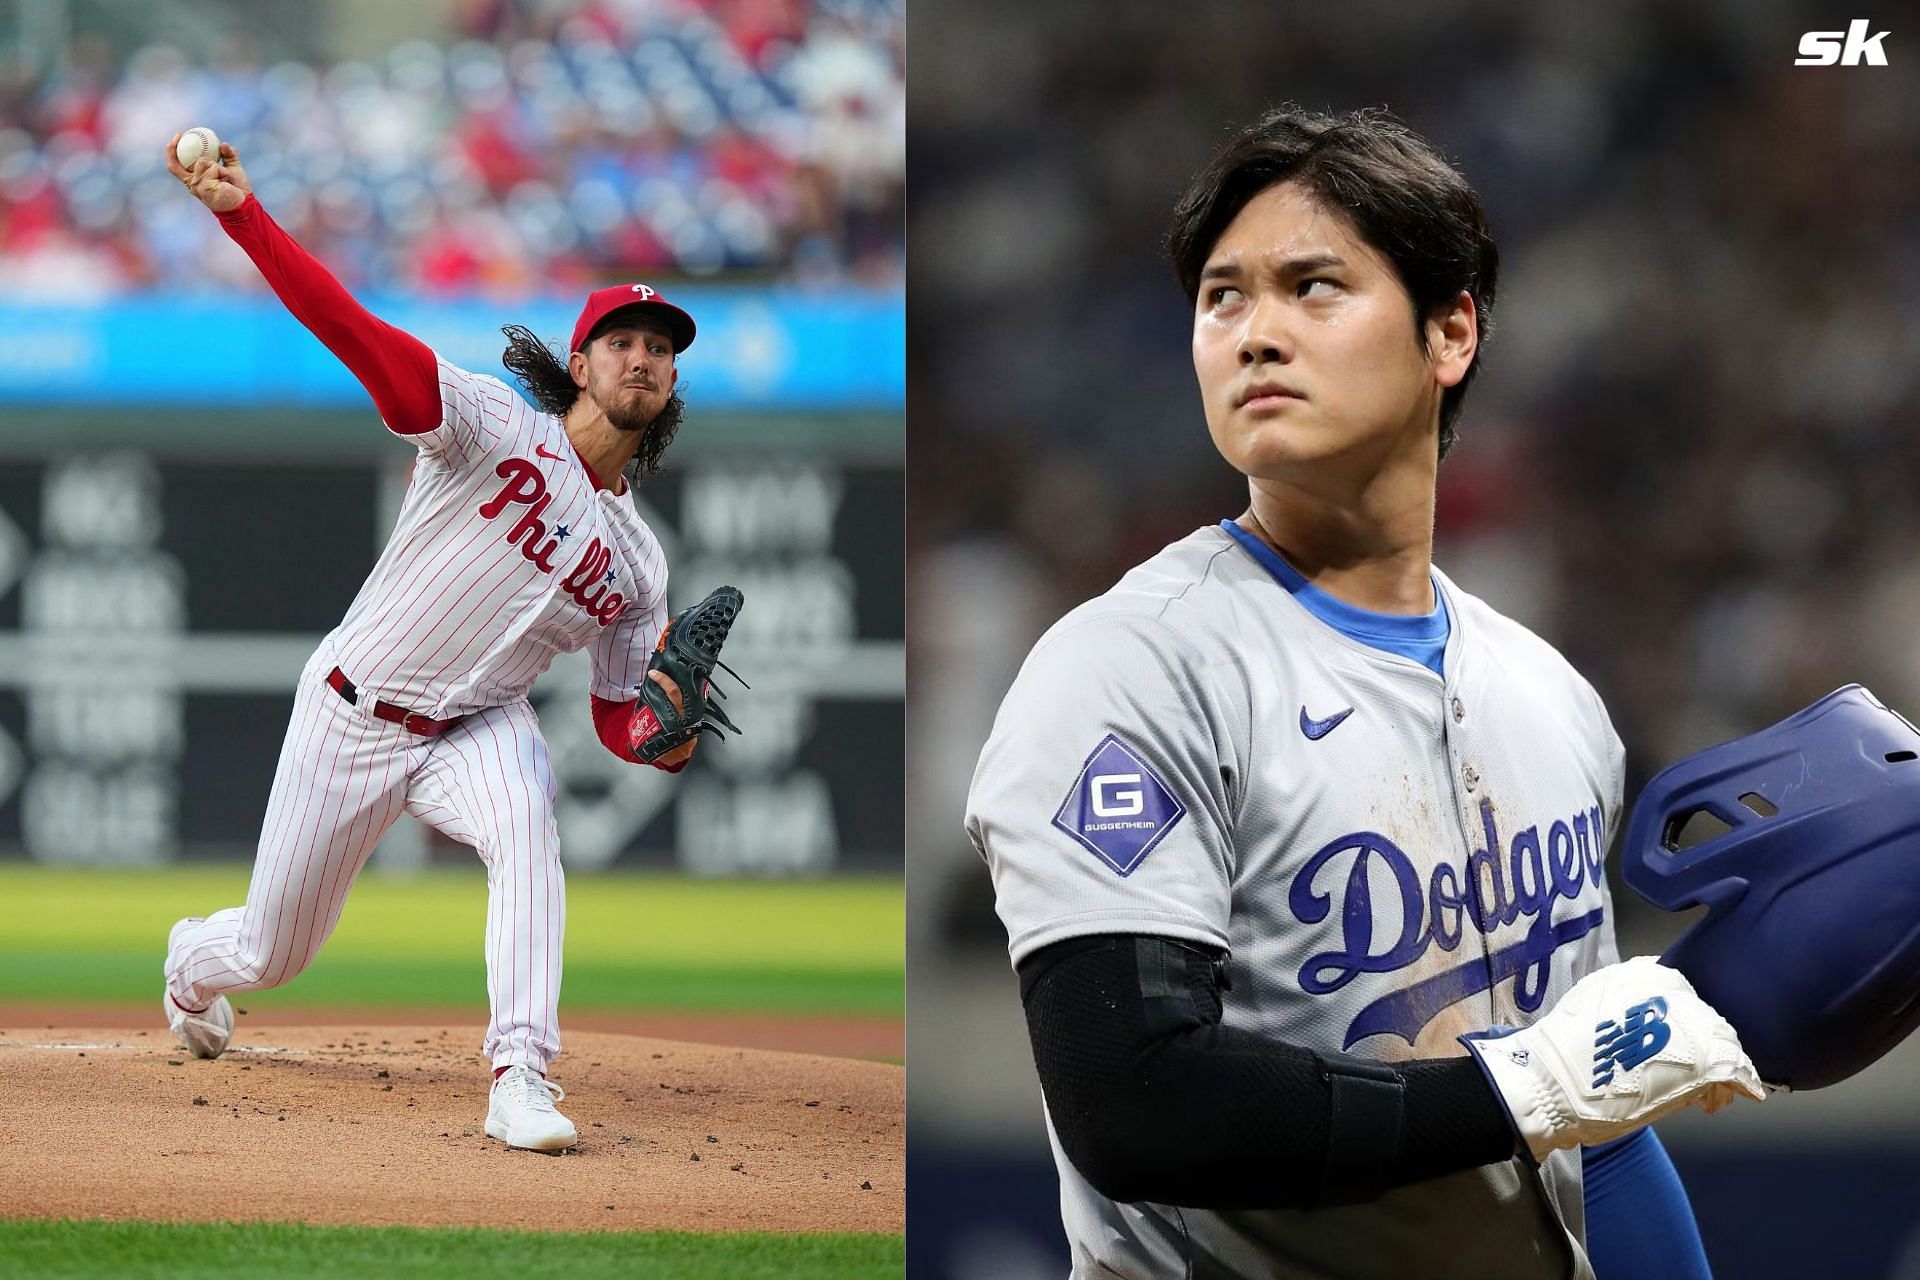 Fans speculate after Michael Lorenzen&rsquo;s $4.5 million Rangers deal with Ippei Mizuhara theft